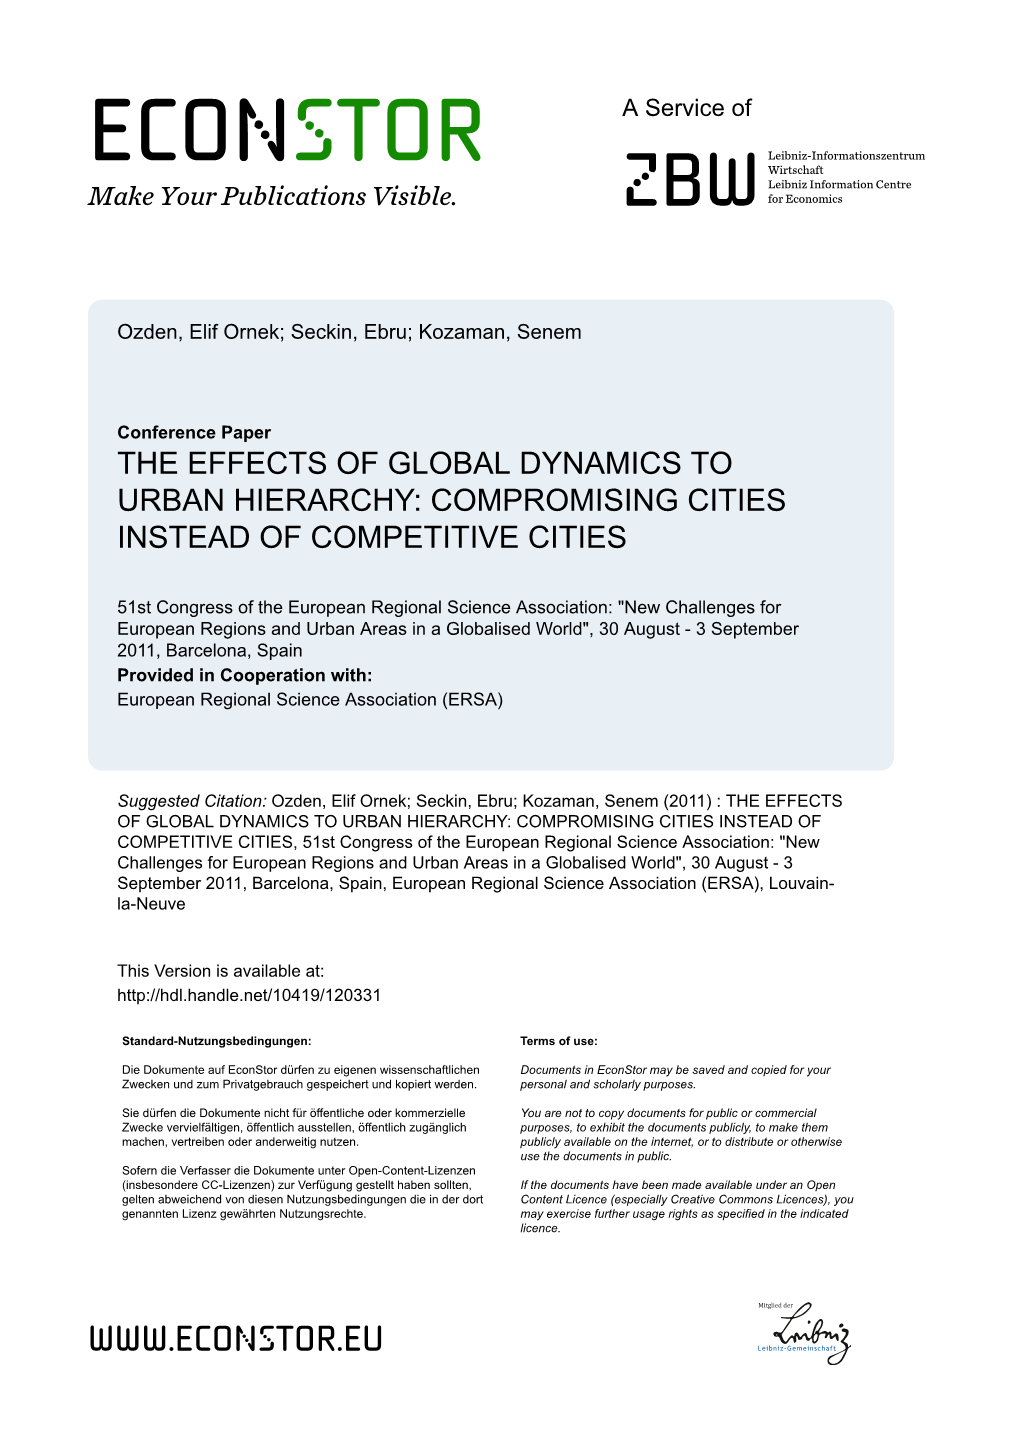 The Effects of Global Dynamics to Urban Hierarchy: Compromising Cities Instead of Competitive Cities